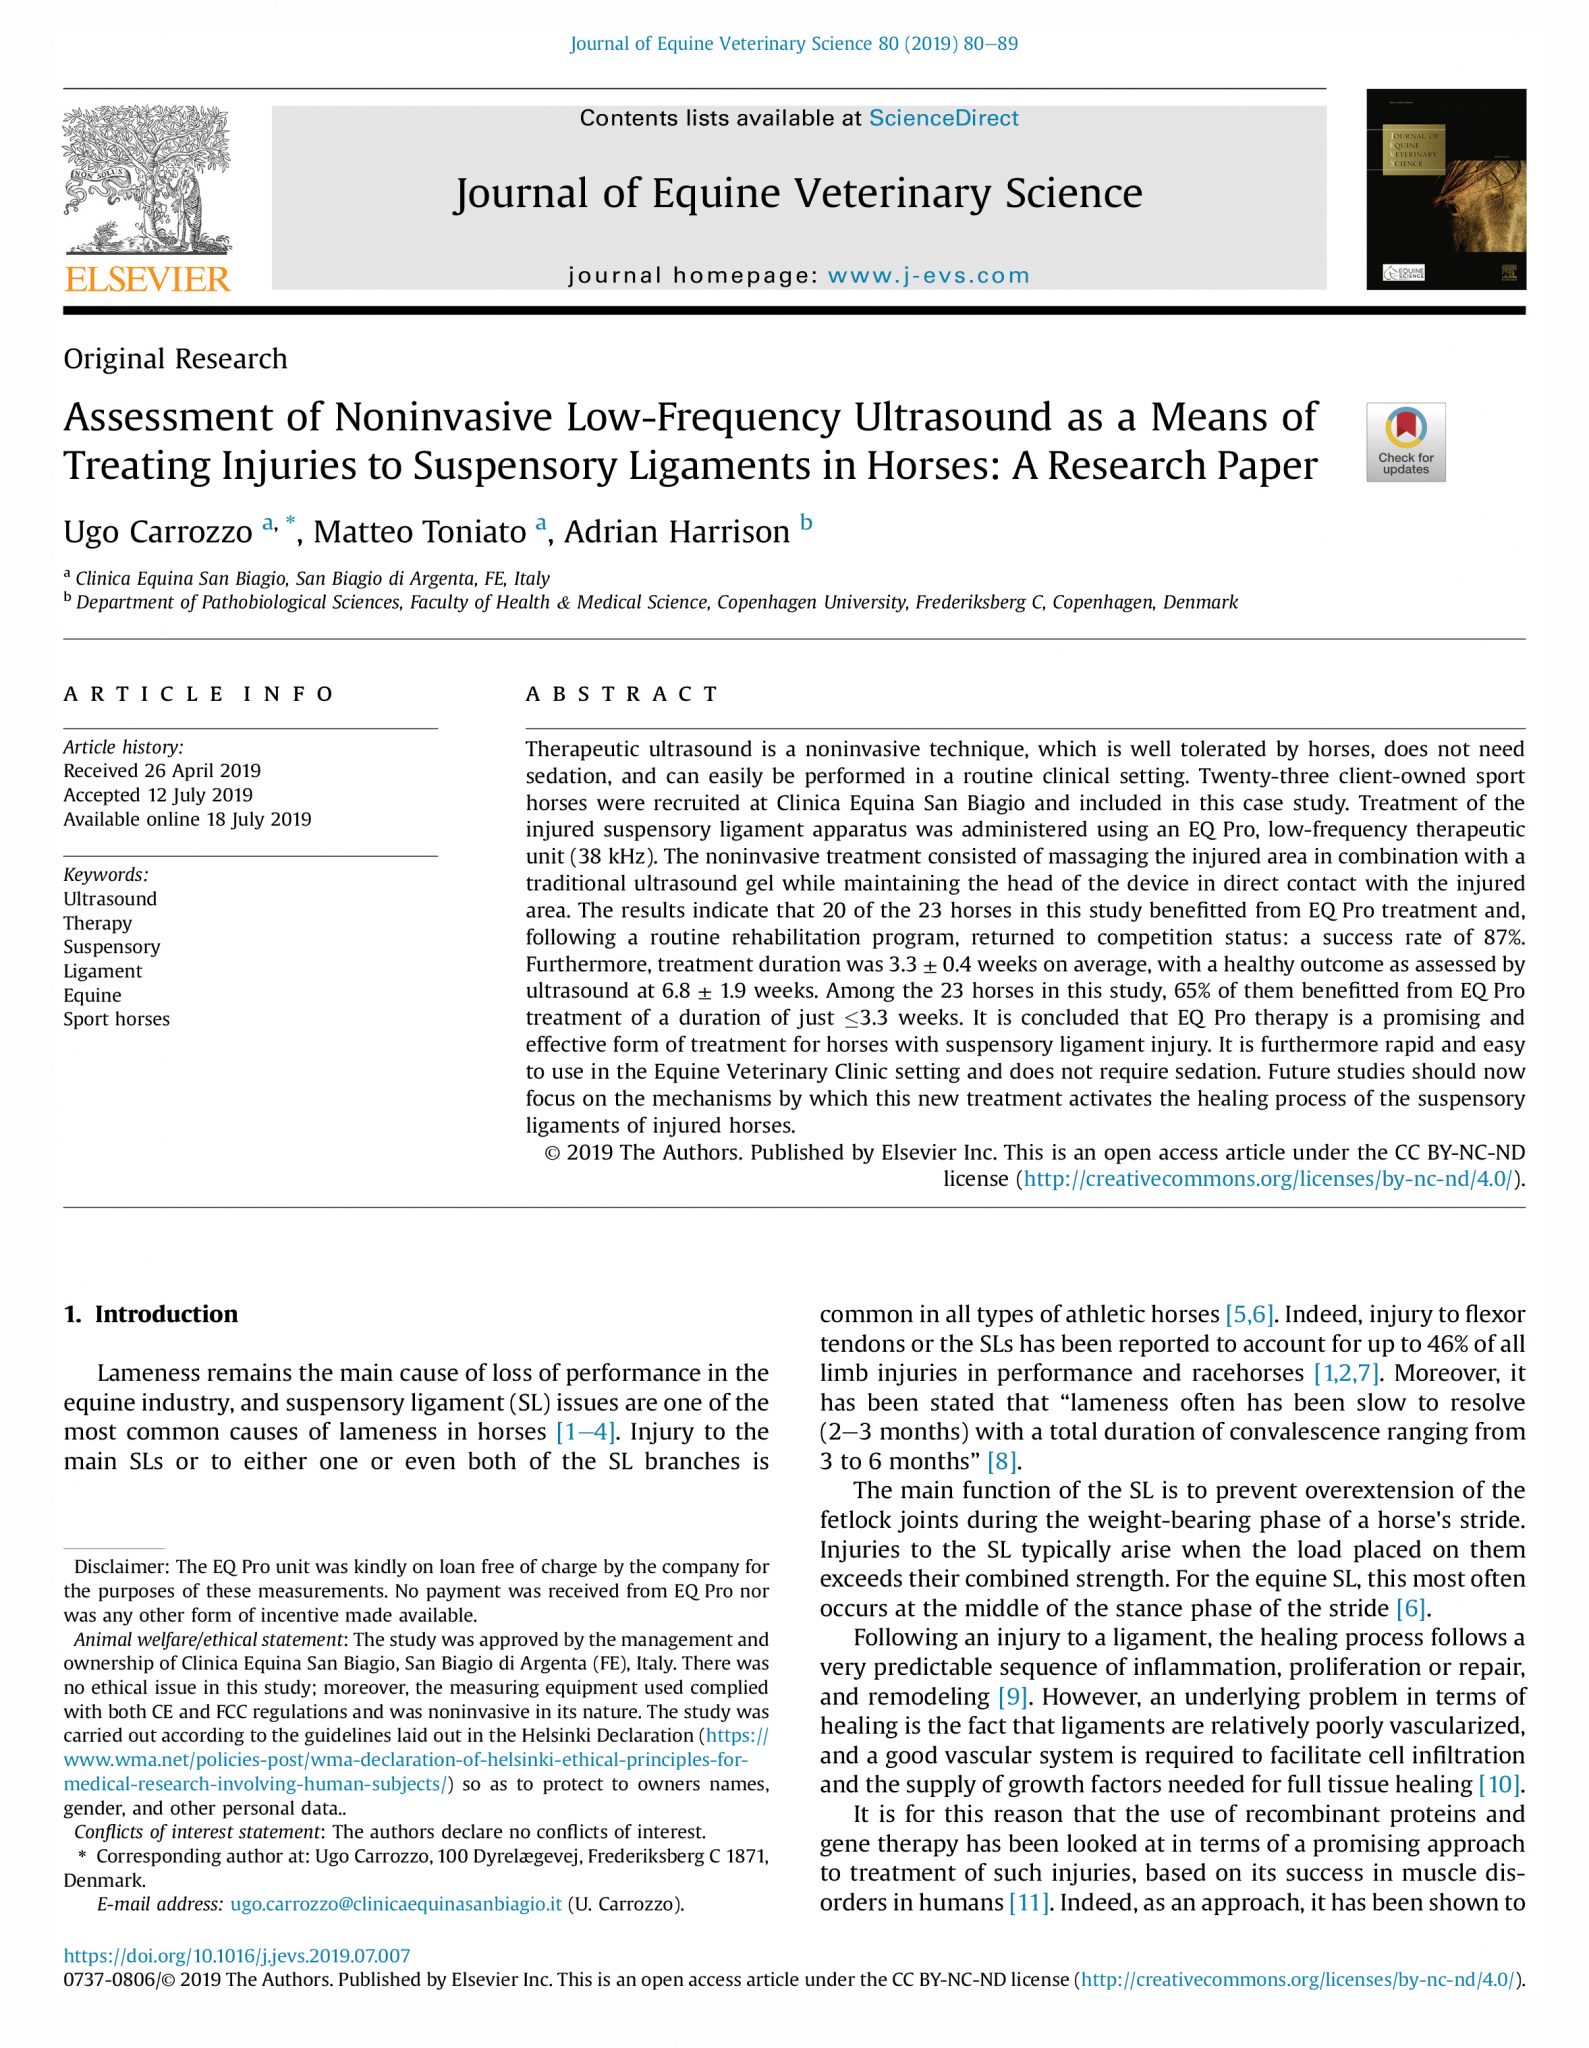 Assessment-of-Noninvasive-Low-Frequency-Ultrasound-as-a-Means-of-Treating-Injuries-to-Suspensory-Ligaments-in-Horses-A-Research-Paper